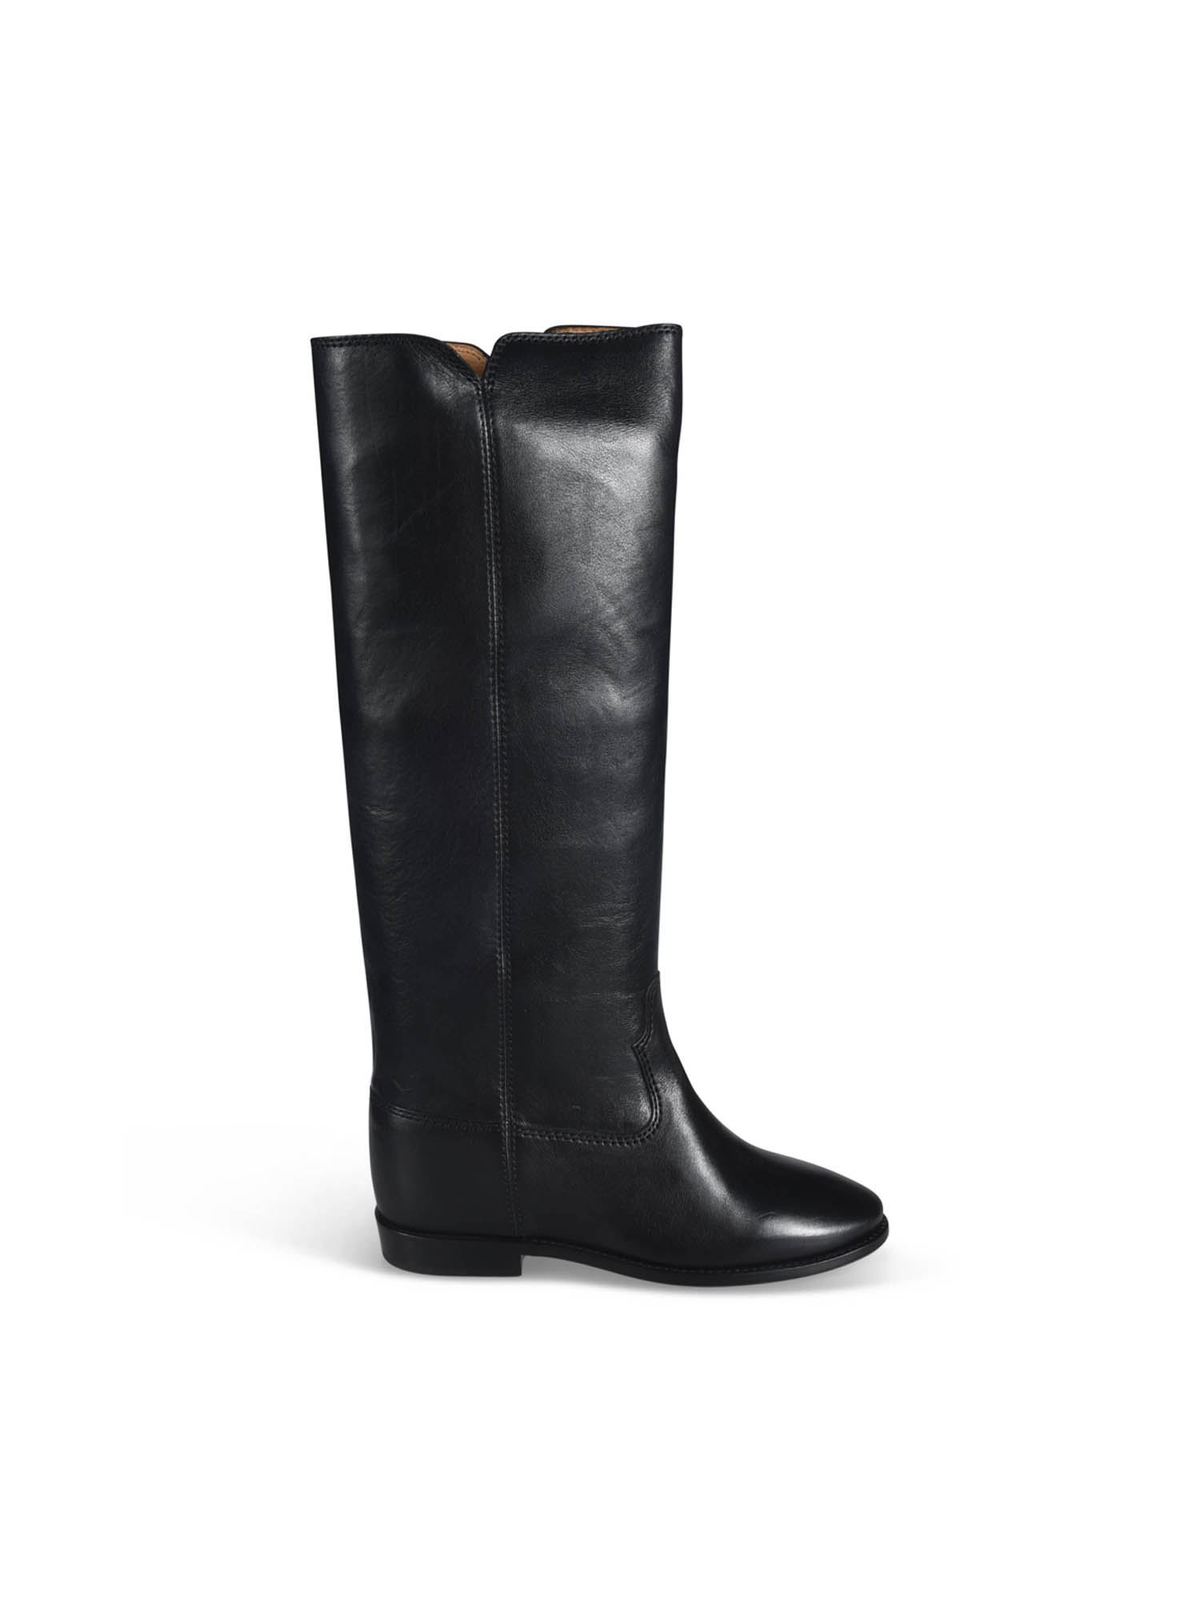 isabel marant chess leather boots